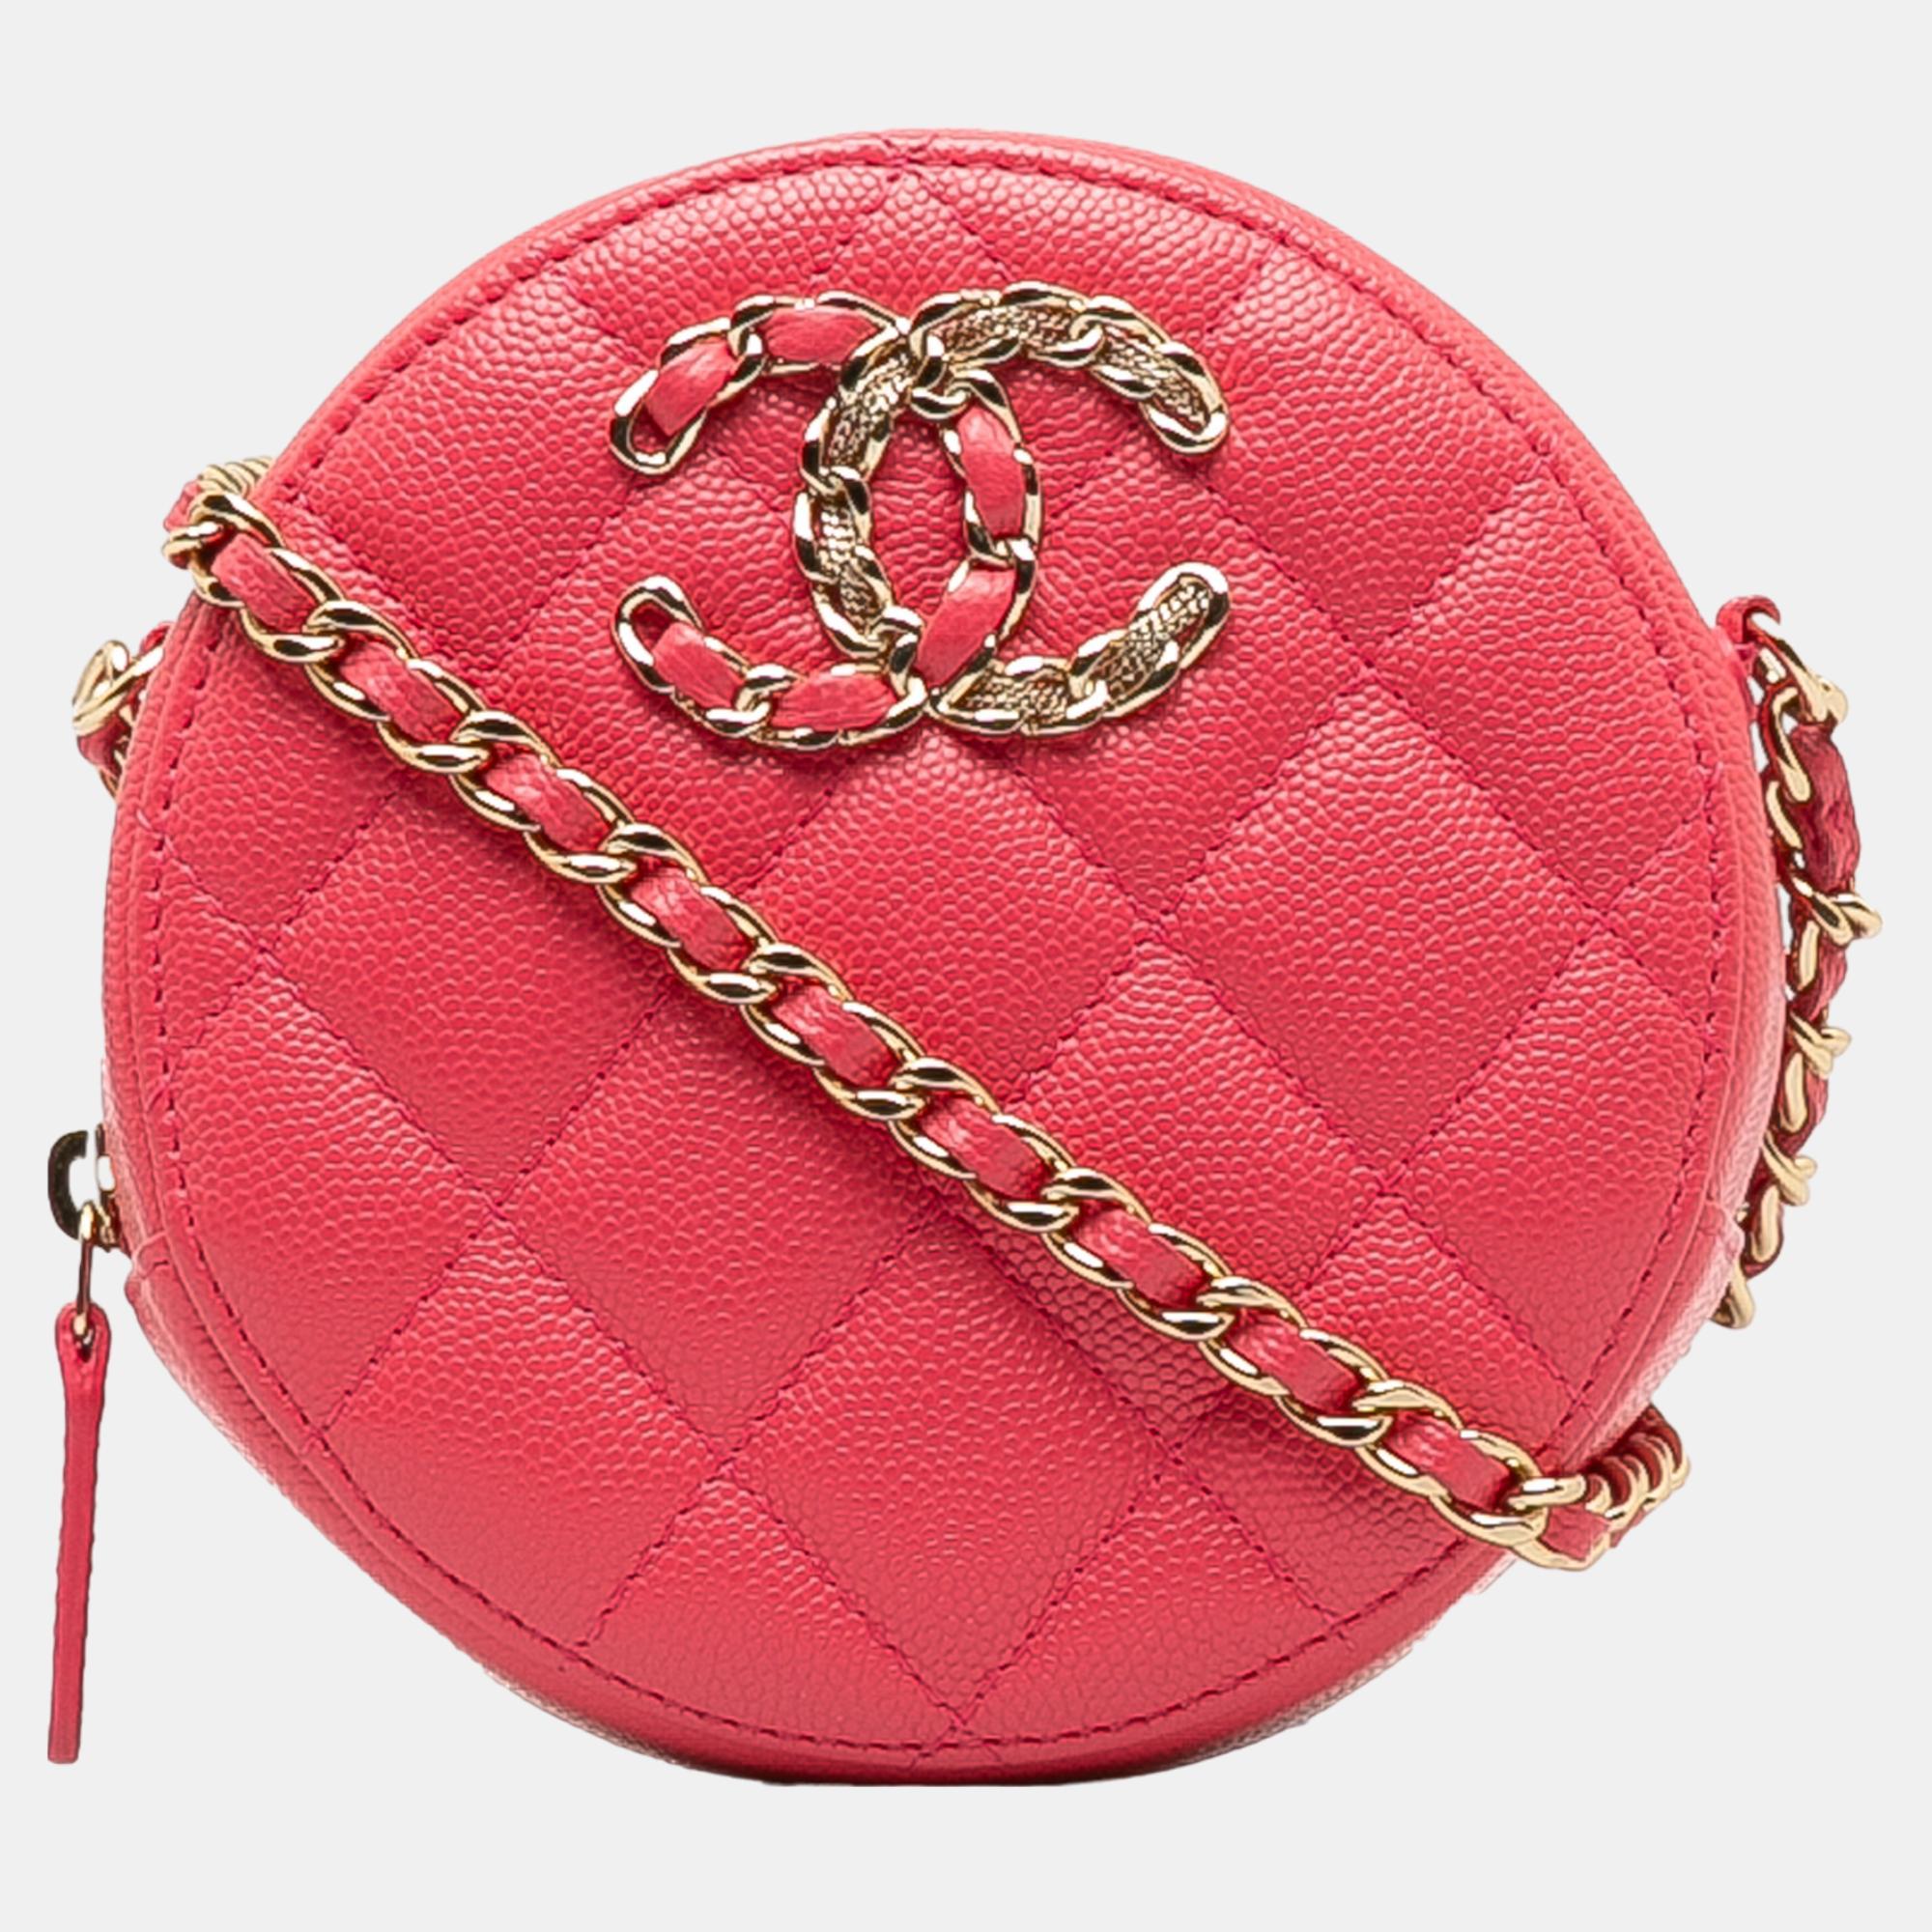 Chanel pink 19 round caviar clutch with chain